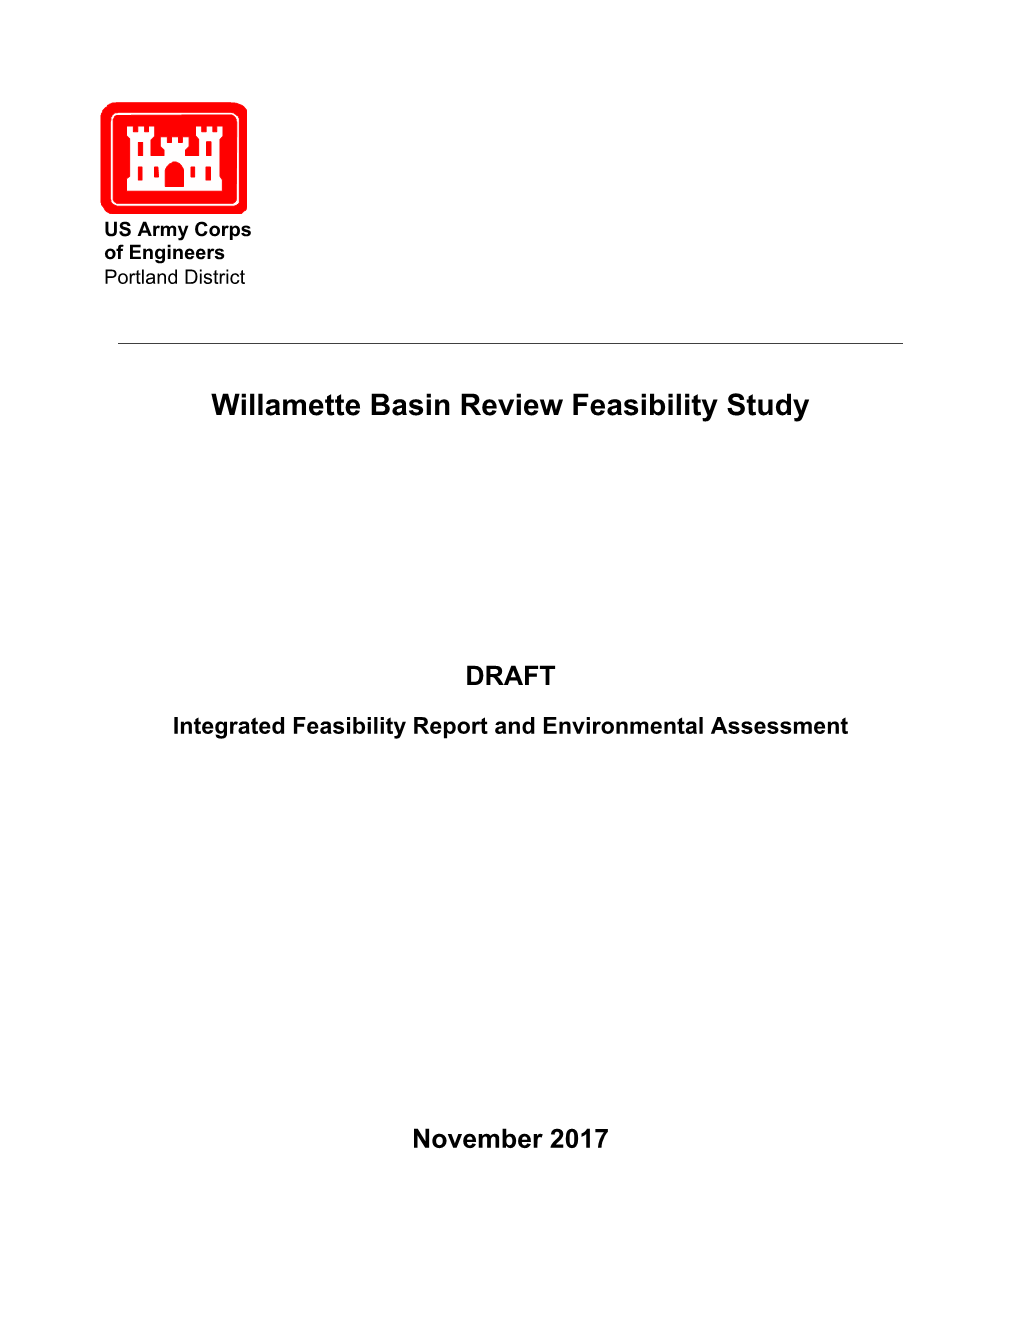 Willamette Basin Review Feasibility Study